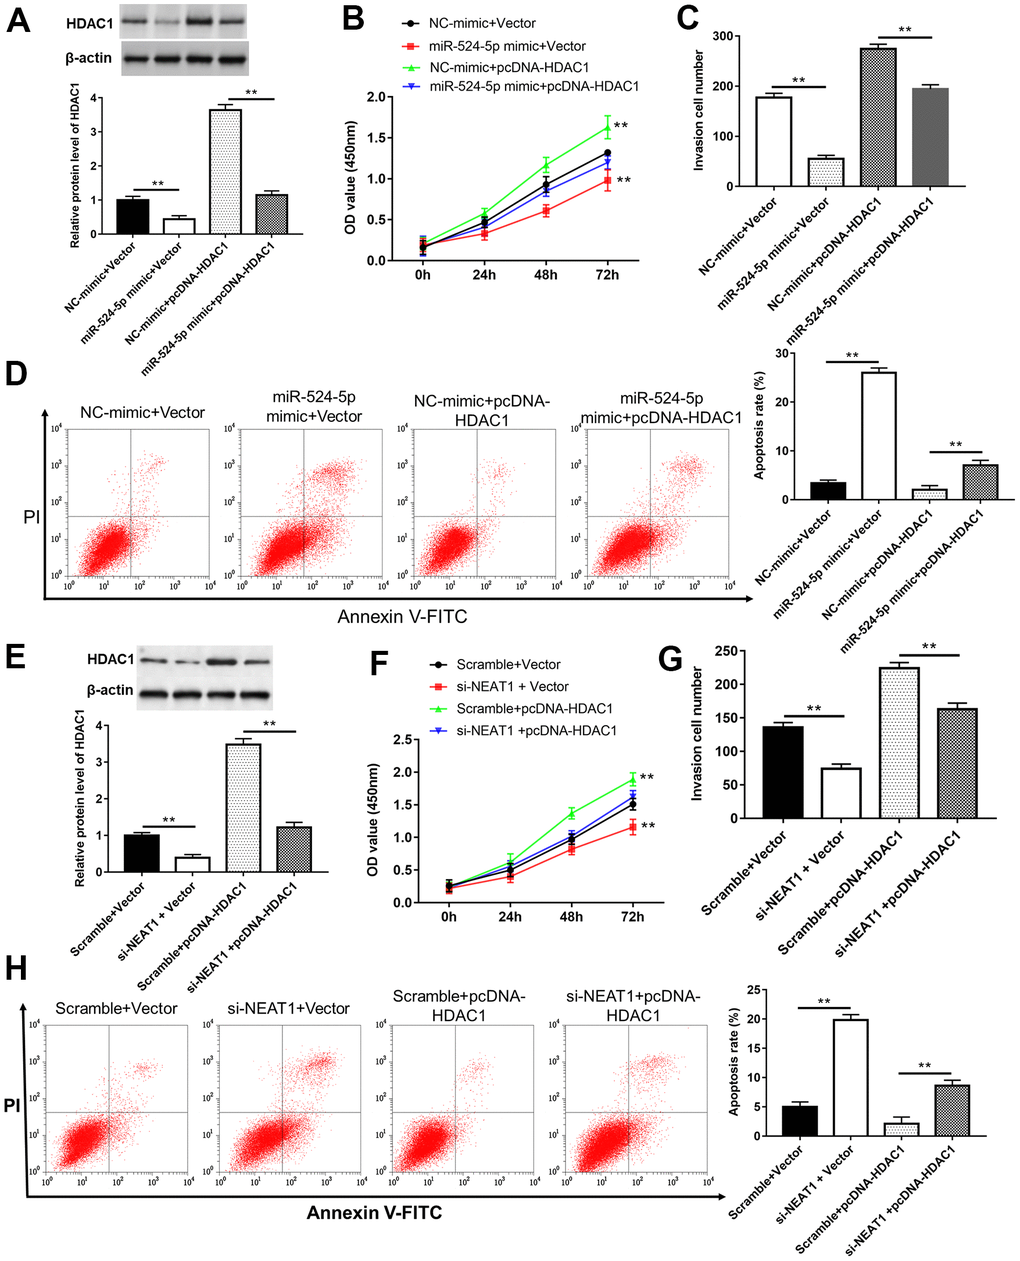 Overexpression of HDAC1 reversed the inhibitory effects of miR-524-5p overexpression and NEAT1 silence on cell proliferation and invasion. (A) The protein level of HDAC1 was detected after TU212 cells transfected with pcDNA-HDAC1 or/and miR-524-5p mimic. (B) Cell proliferation was detected with CCK-8 assay. (C) Transwell assay was used to evaluate cell invasion ability. (D) Apoptosis rates of TU212 cells. (E) The protein level of HDAC1 was detected after TU212 cells transfected with pcDNA-HDAC1 or/and si-NEAT1. (F) Cell proliferation was detected with CCK-8 assay. (G) Transwell assay was used to evaluate cell invasion ability. (H) Apoptosis rates of TU212 cells. * P P 